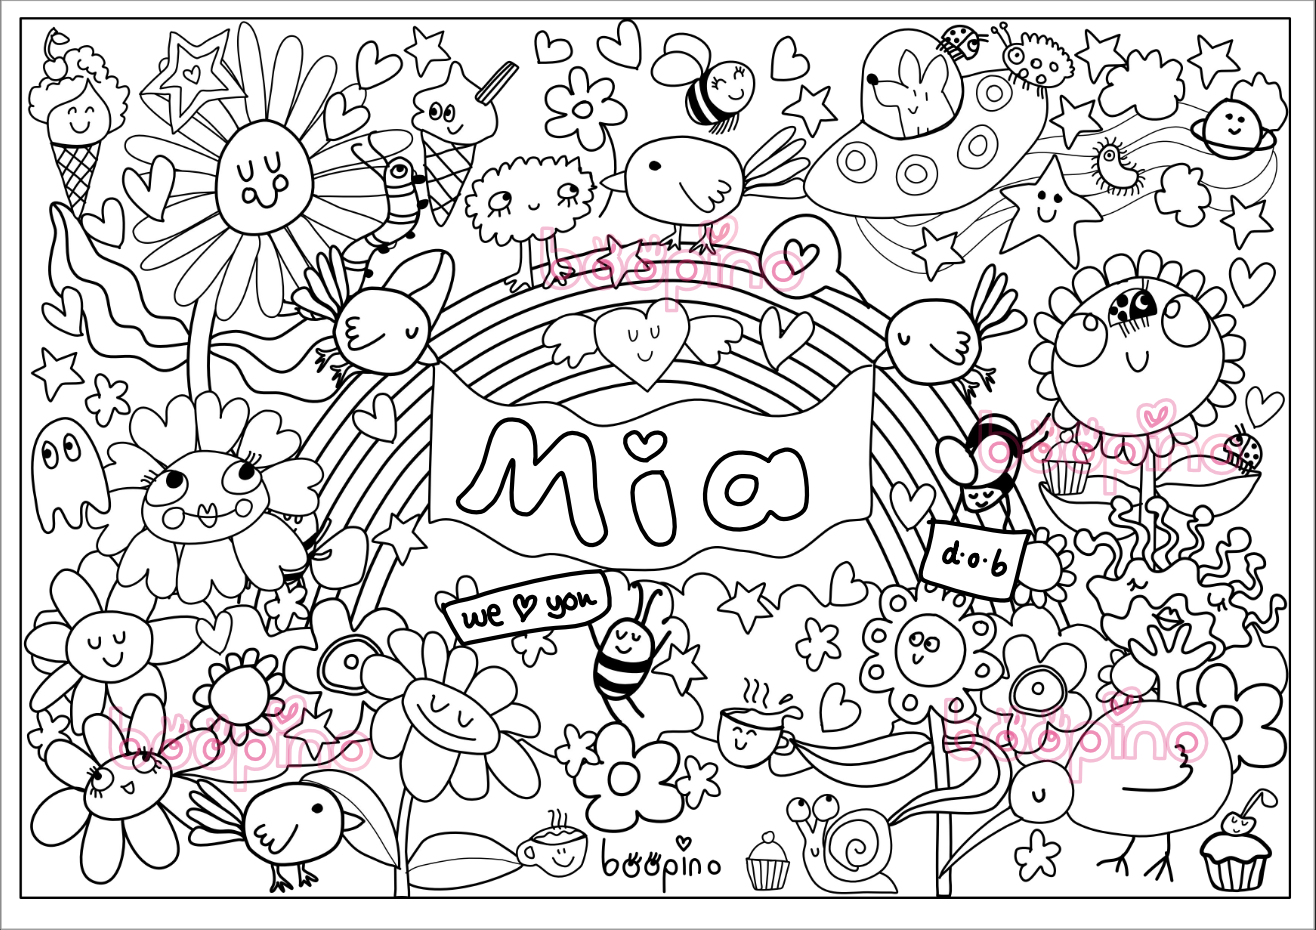 Personalised name colouring poster